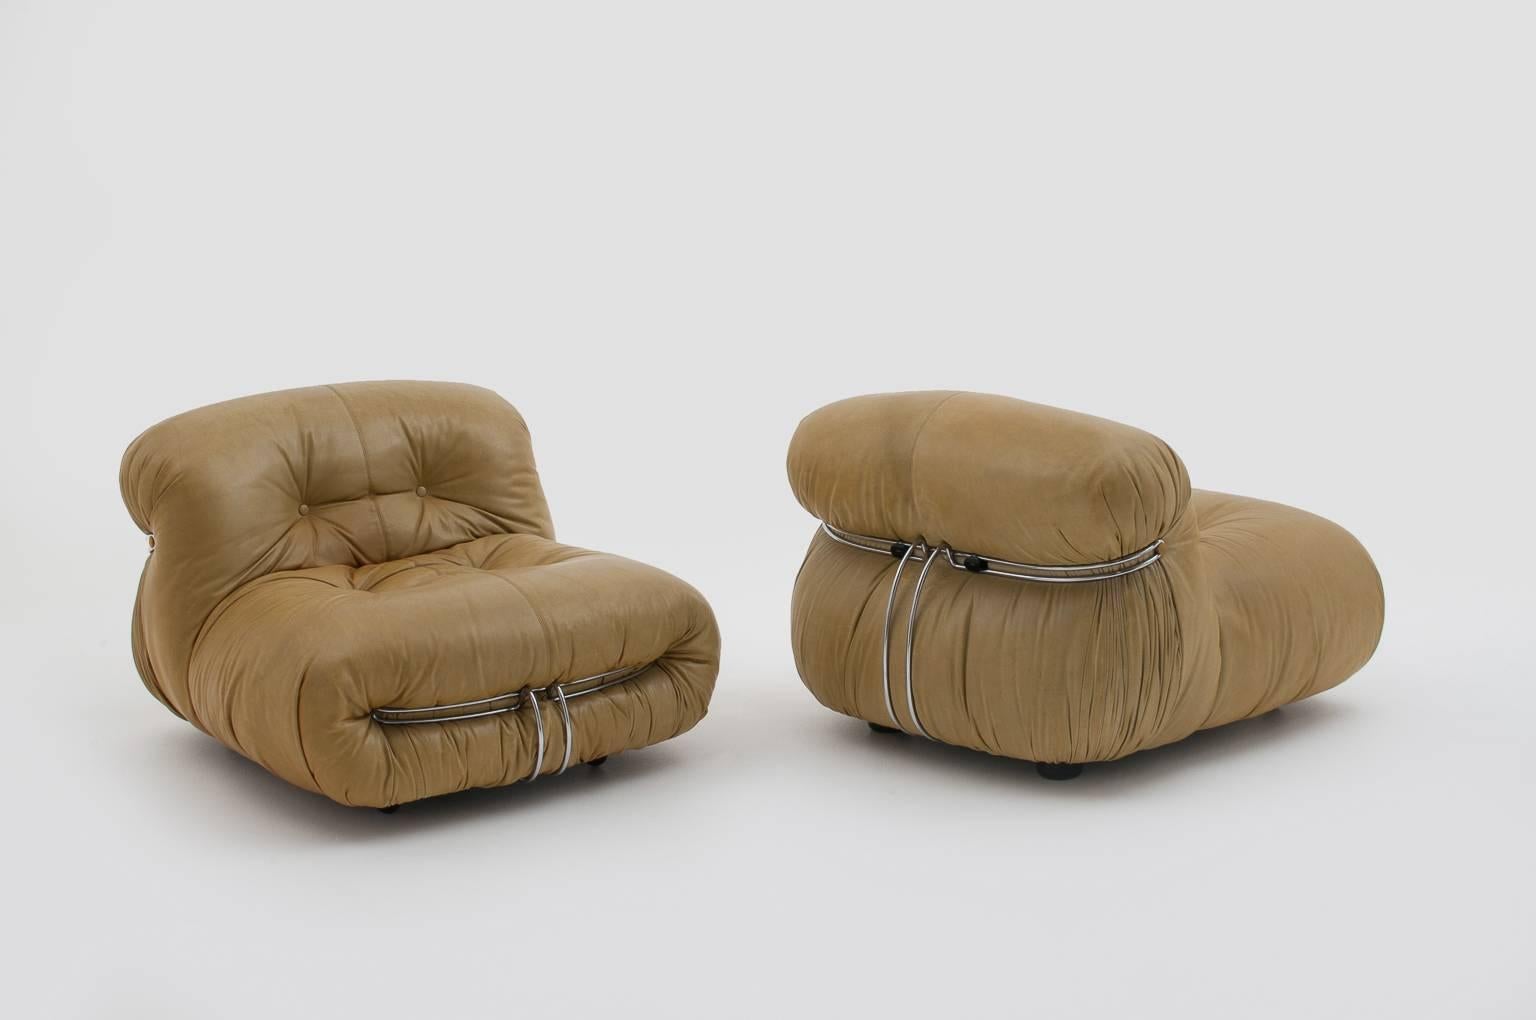 Patinated Leather Italian Midcentury Soriana Lounge Chairs by Afra & Tobia Scarpa, 1960s